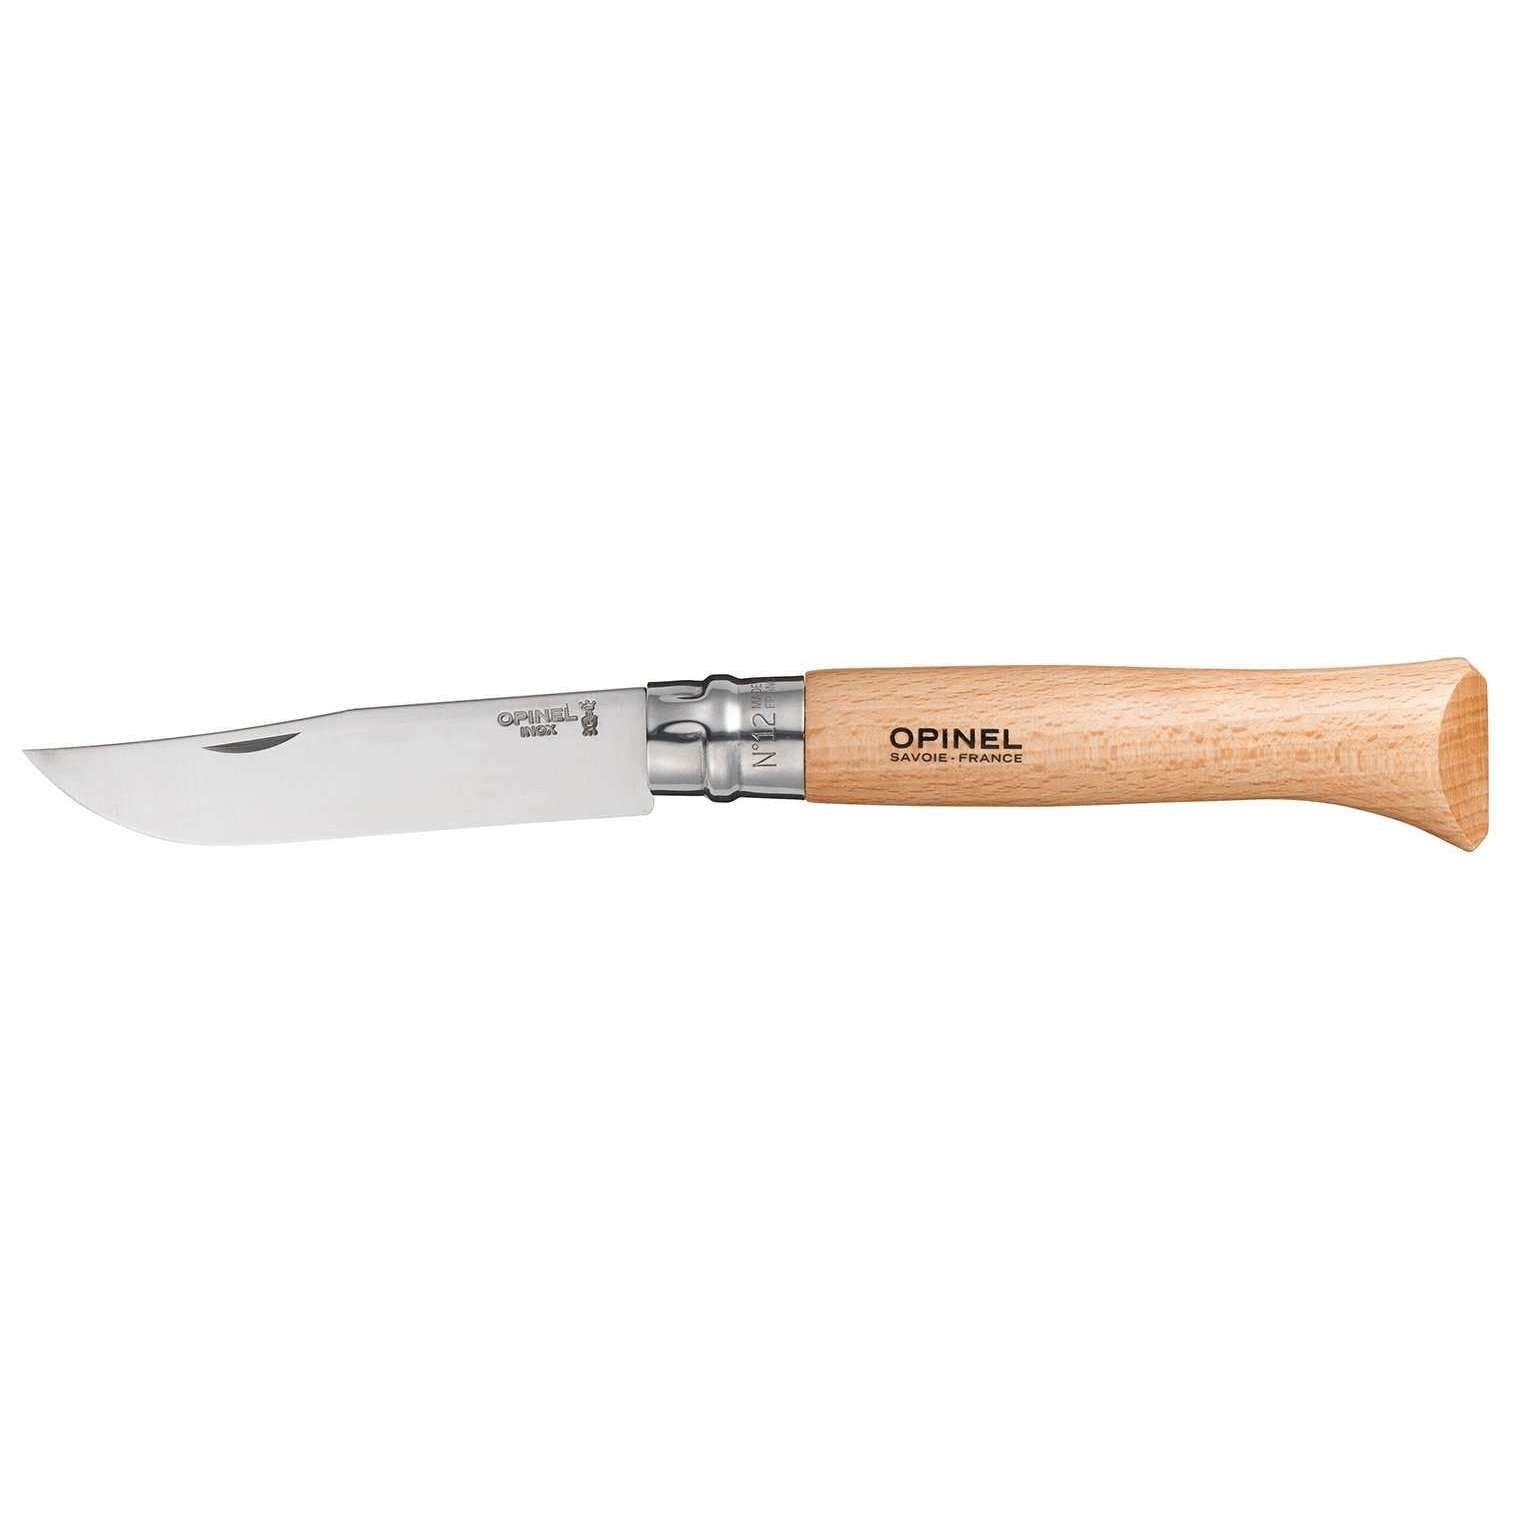 Opinel, Opinel No.12 Classic Original Stainless Steel Knife, Folding Knives, Wylies Outdoor World,